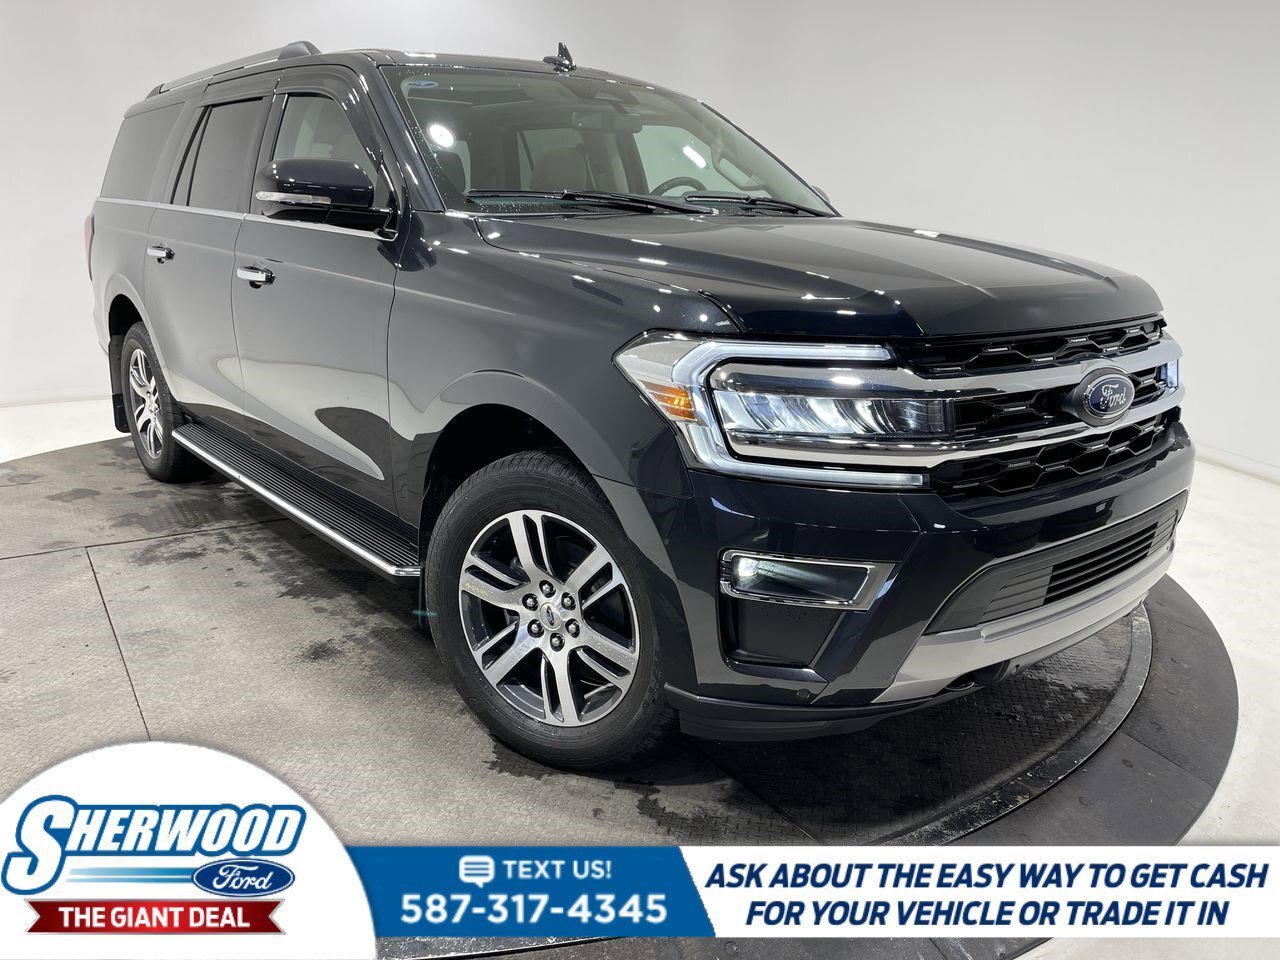 2023 Ford Expedition LTD MAX - $0 Down $338 Weekly